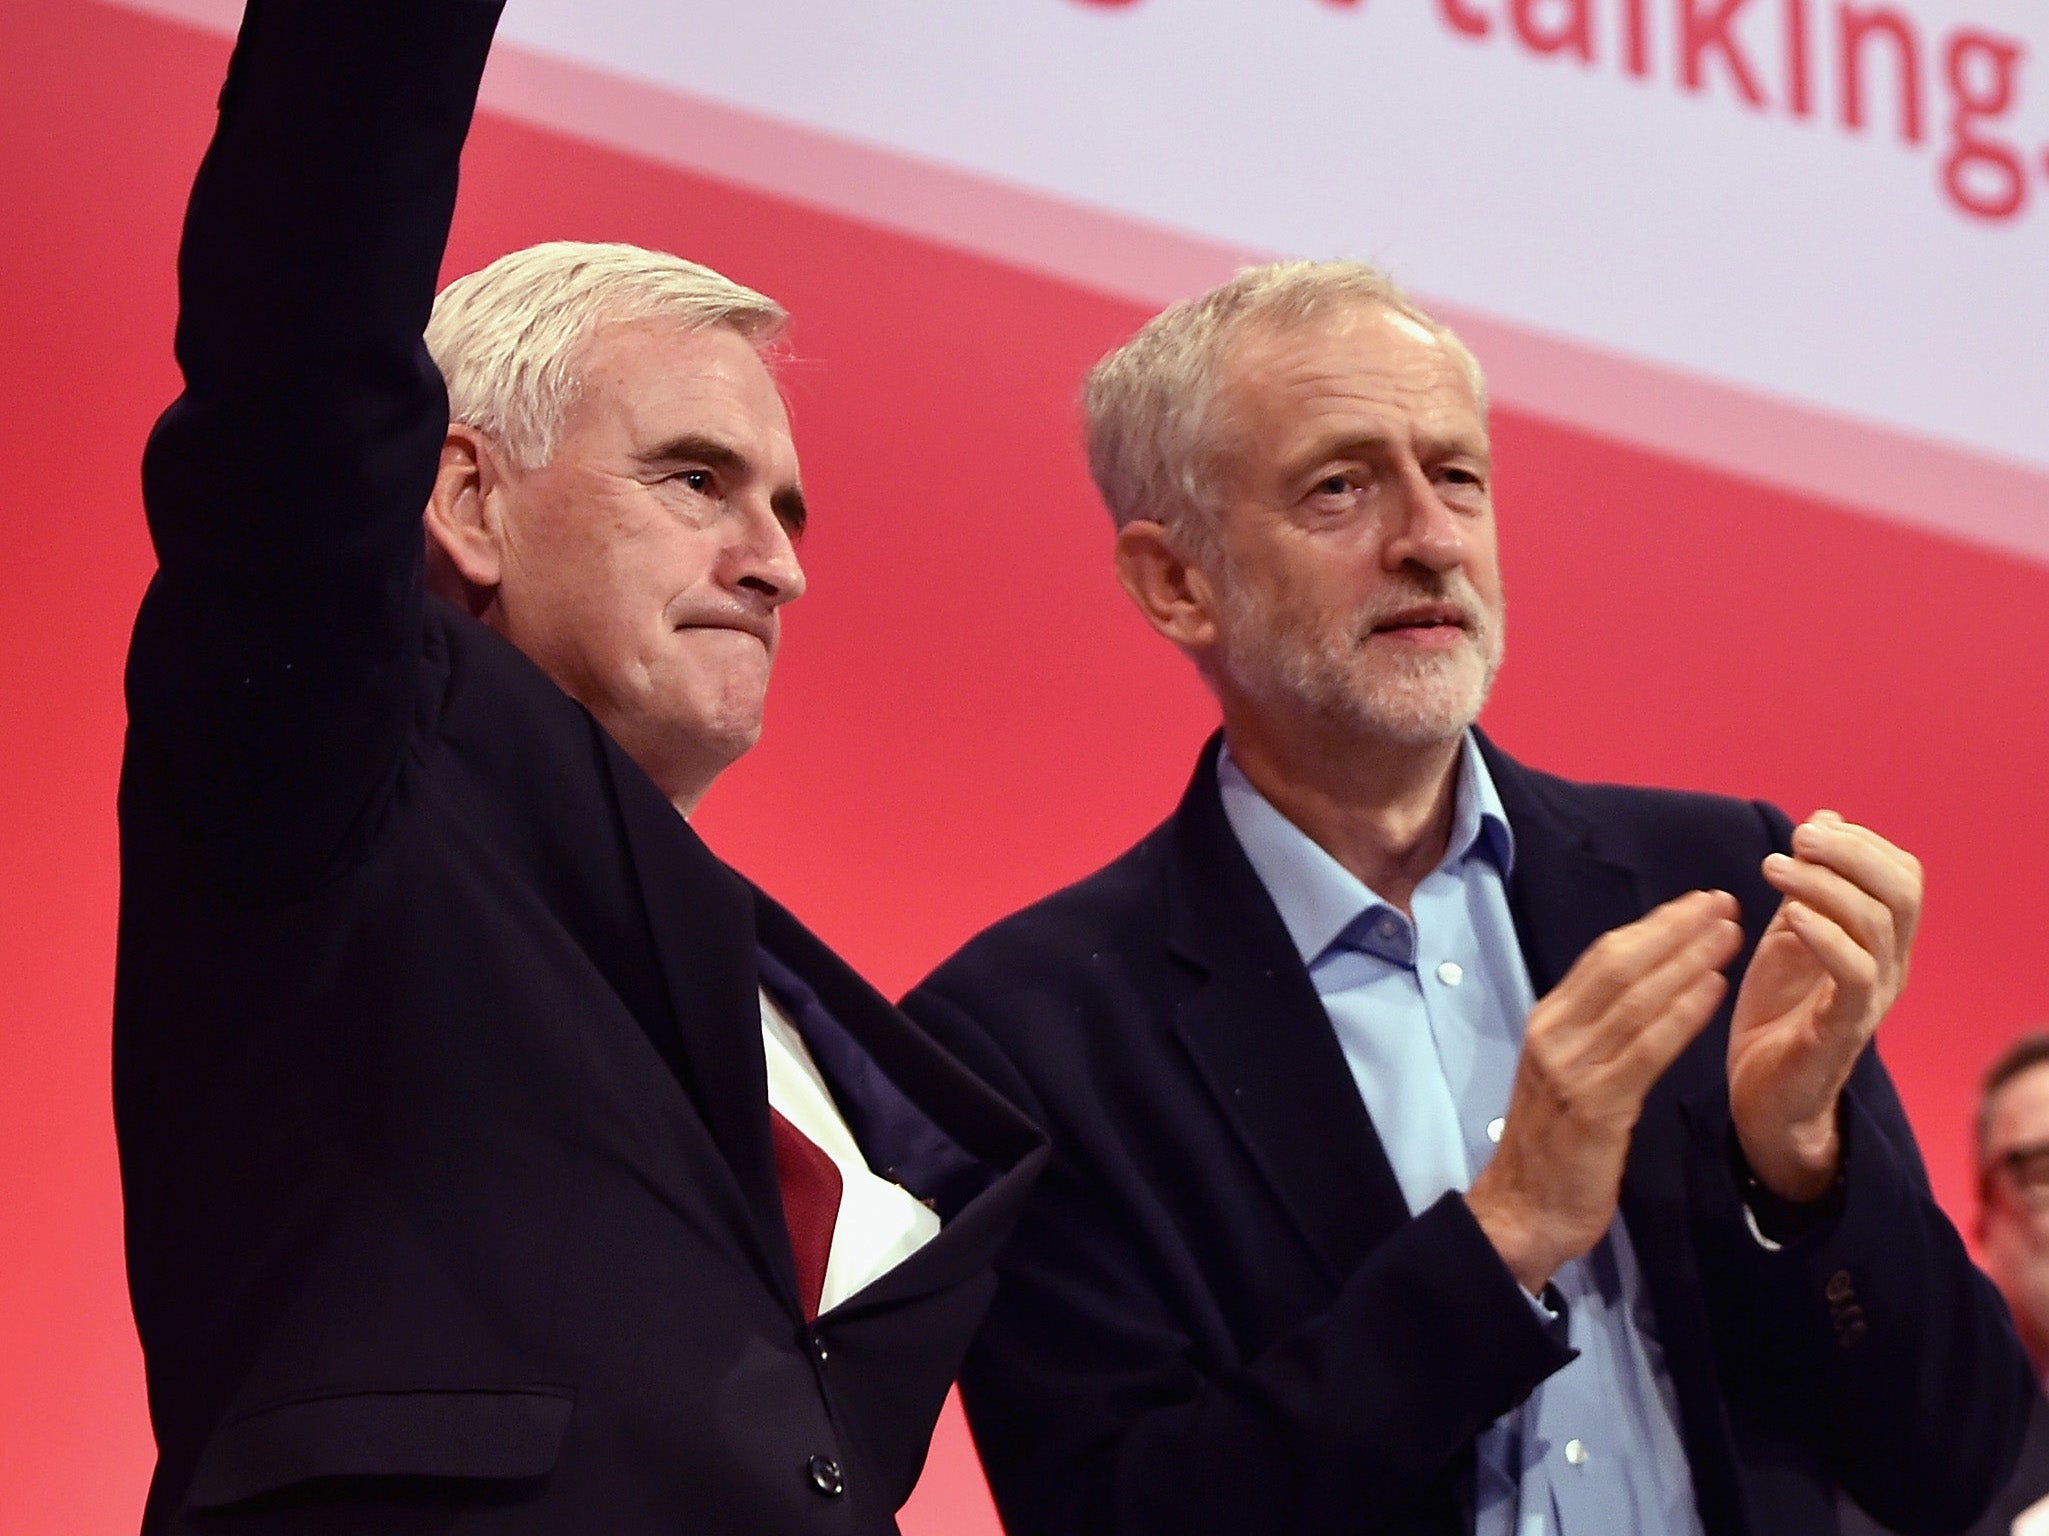 John McDonnell and Jeremy Corbyn at the Labour party conference